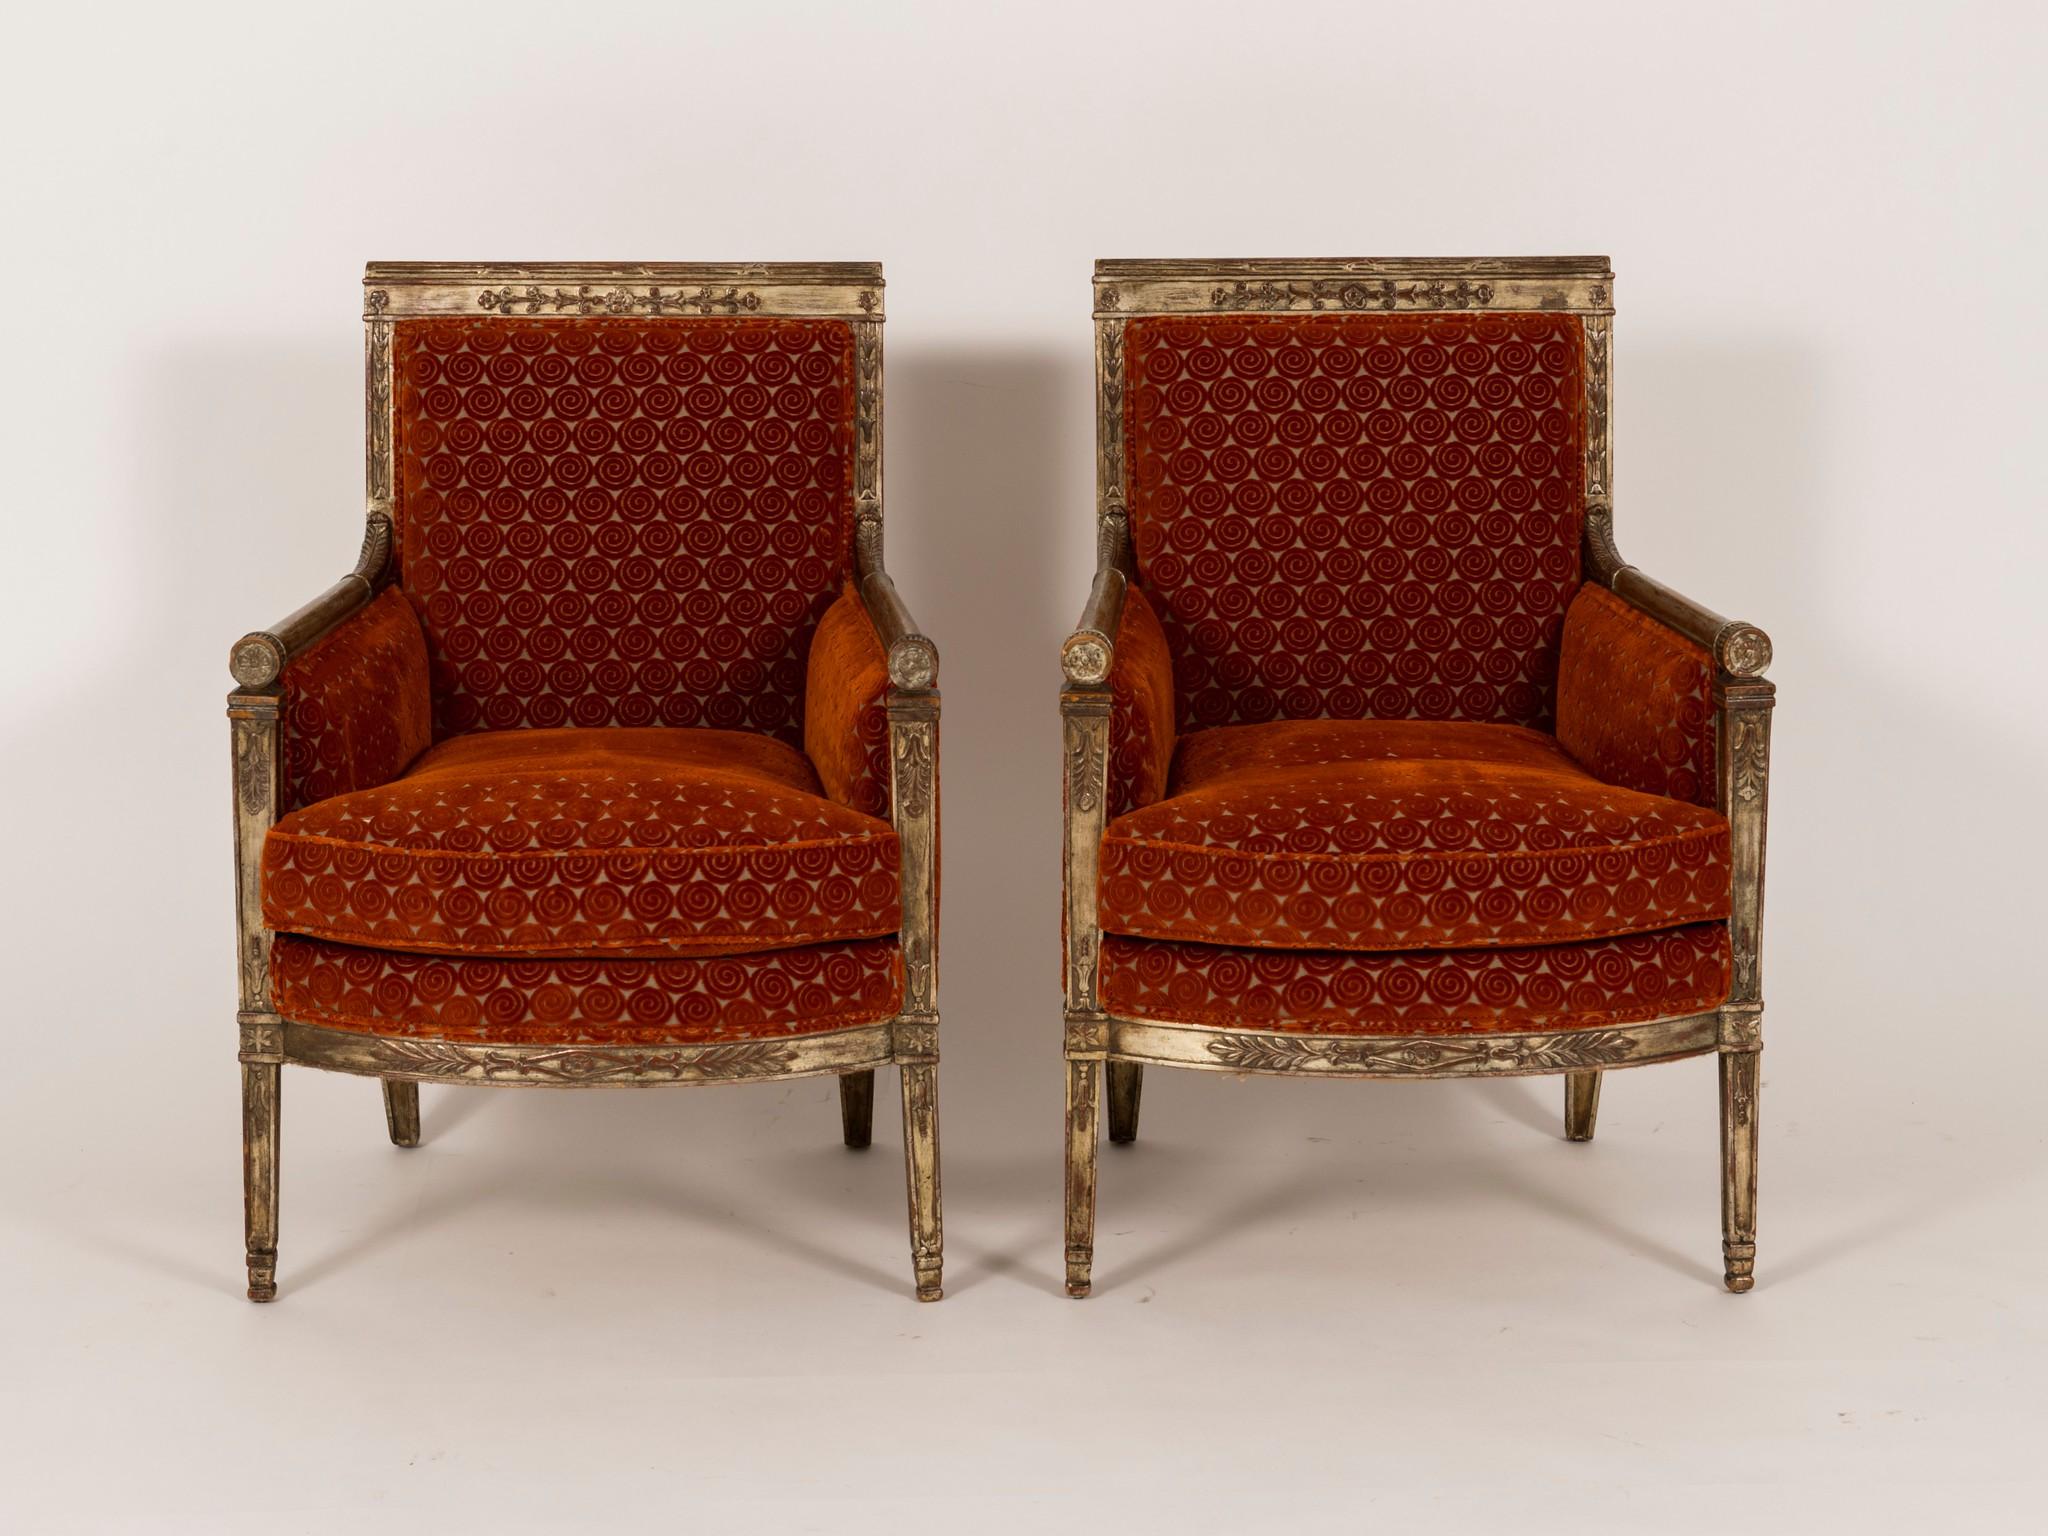 A pair of late 18th century French Directoire silver gilt bergères from a prominent San Francisco estate newly upholstered in a persimmon cut velvet with a lofty loose feather down cushion. These chairs have an array of wonderful detailed carvings.